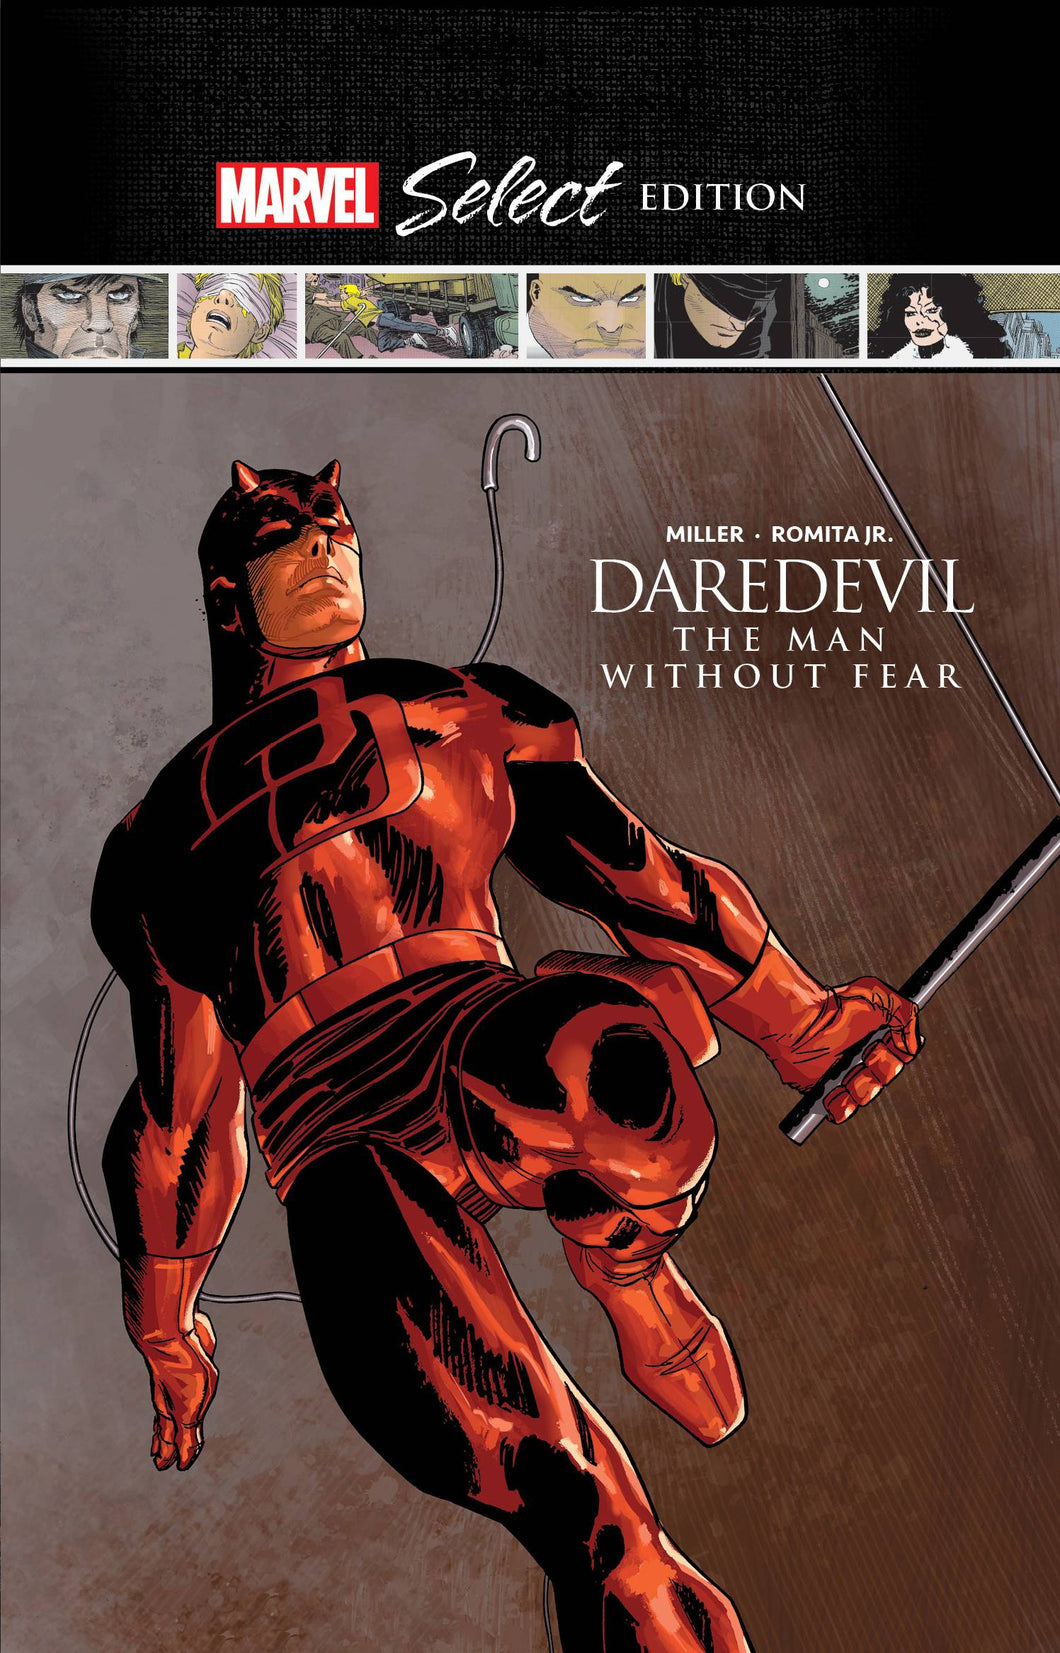 Daredevil HC Man Without Fear Marvel Select - Books